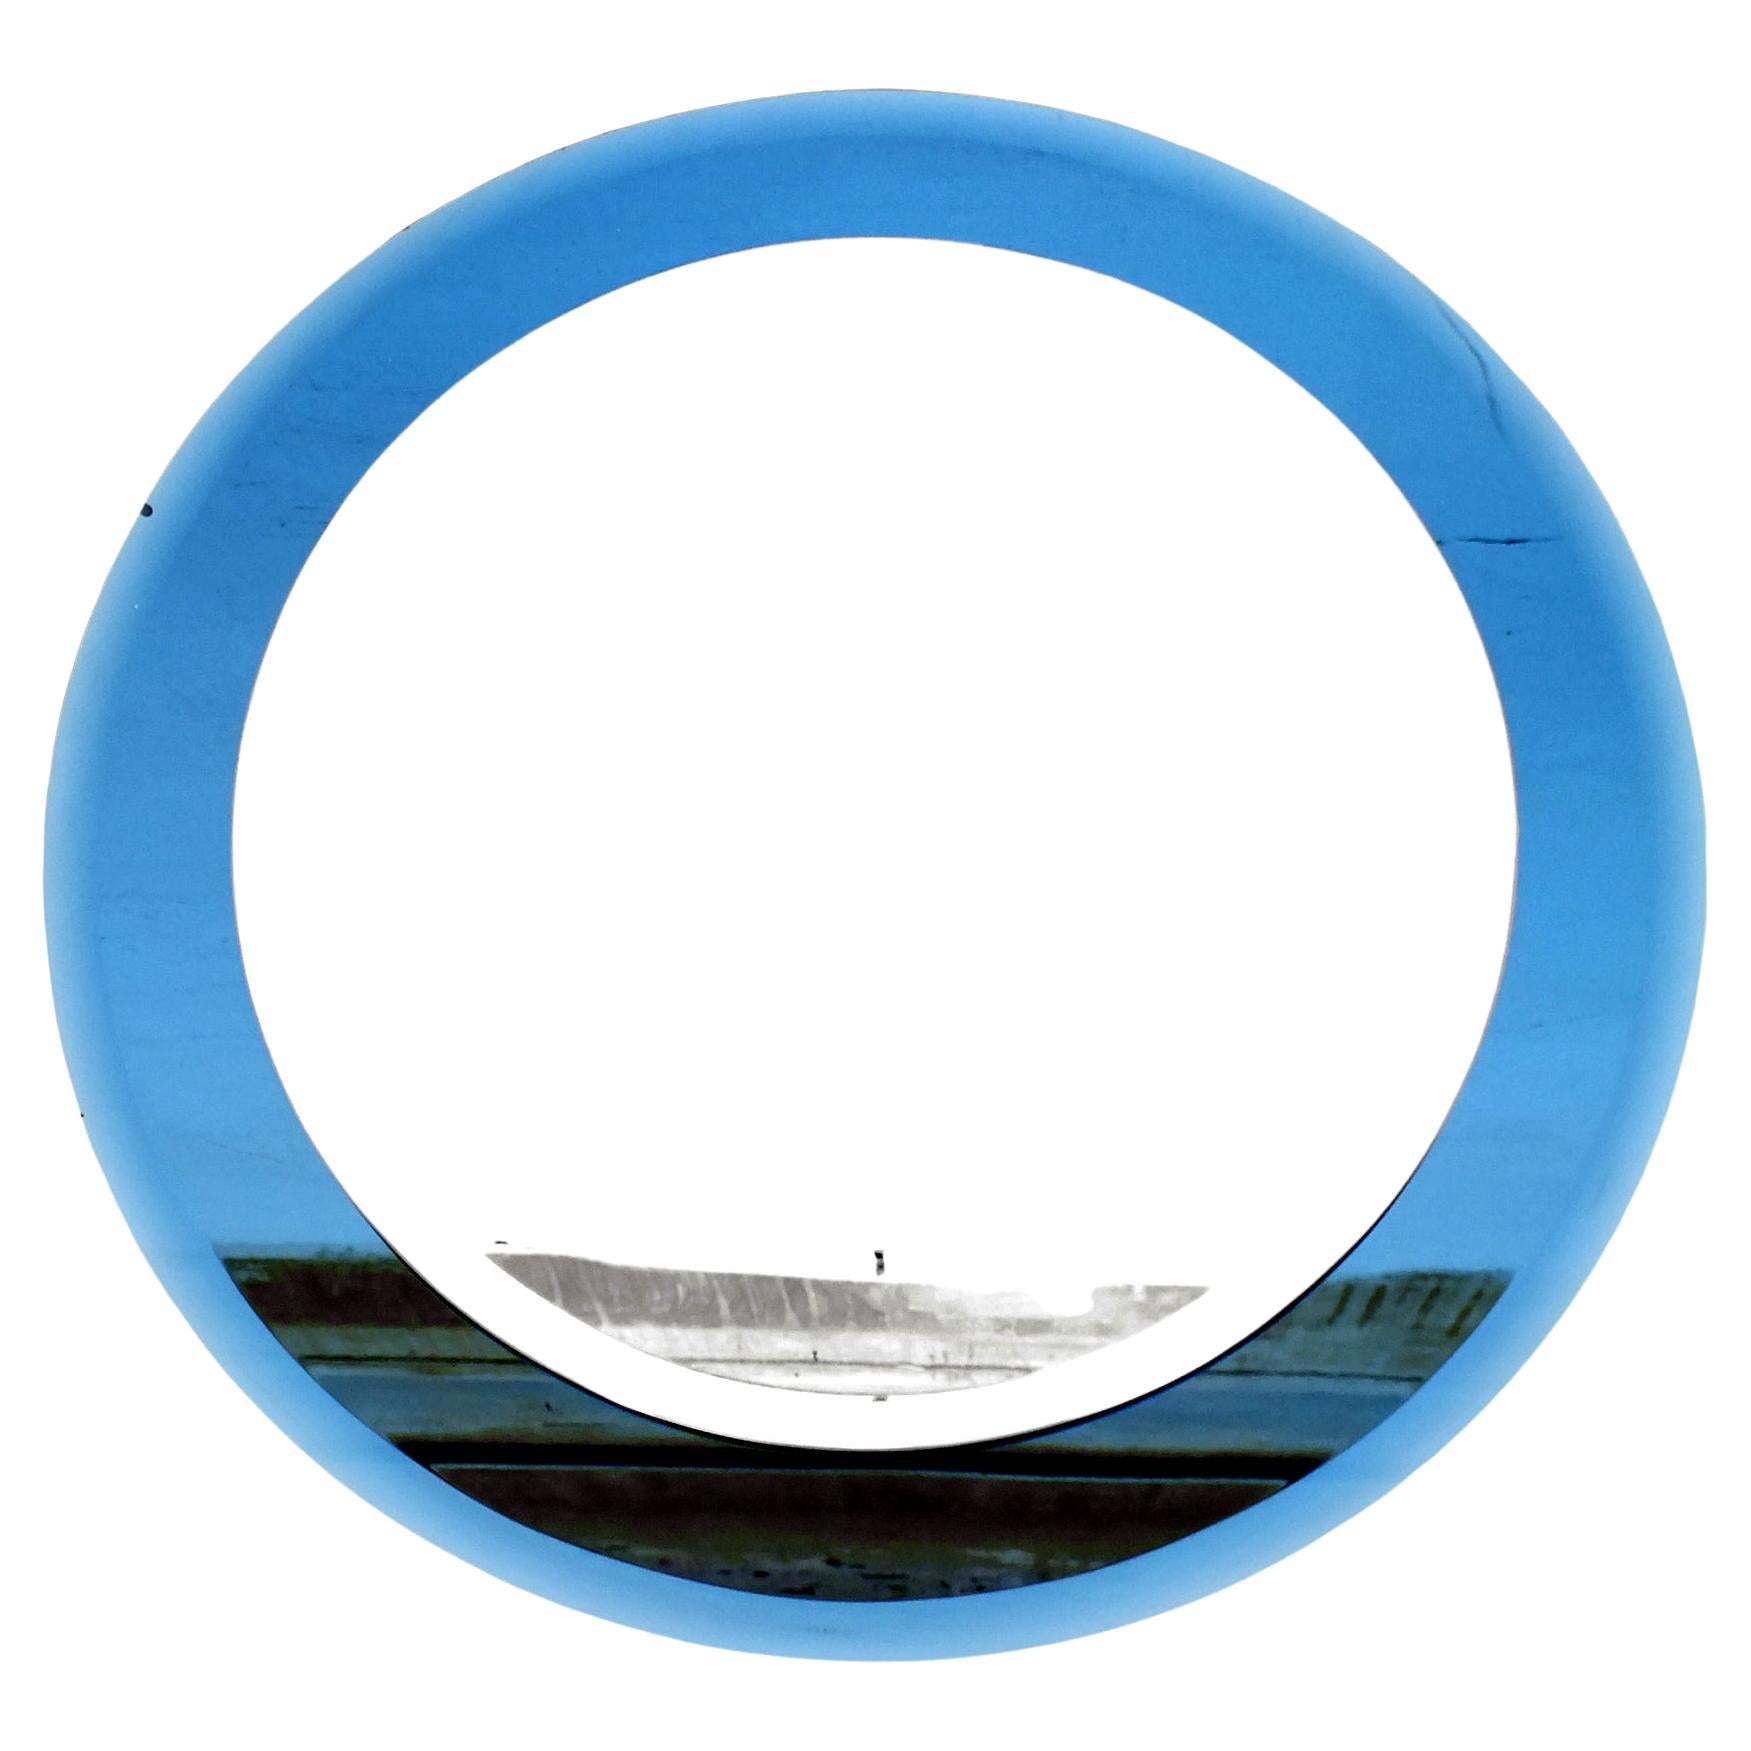 Luigi Fontana design blue cobalt mirror deco' years '40 design Pietro Chiesa attributed

 exclusive double mirror in a blue glass frame

 measure glass external diameter 28 inches and mirror diameter 21.6